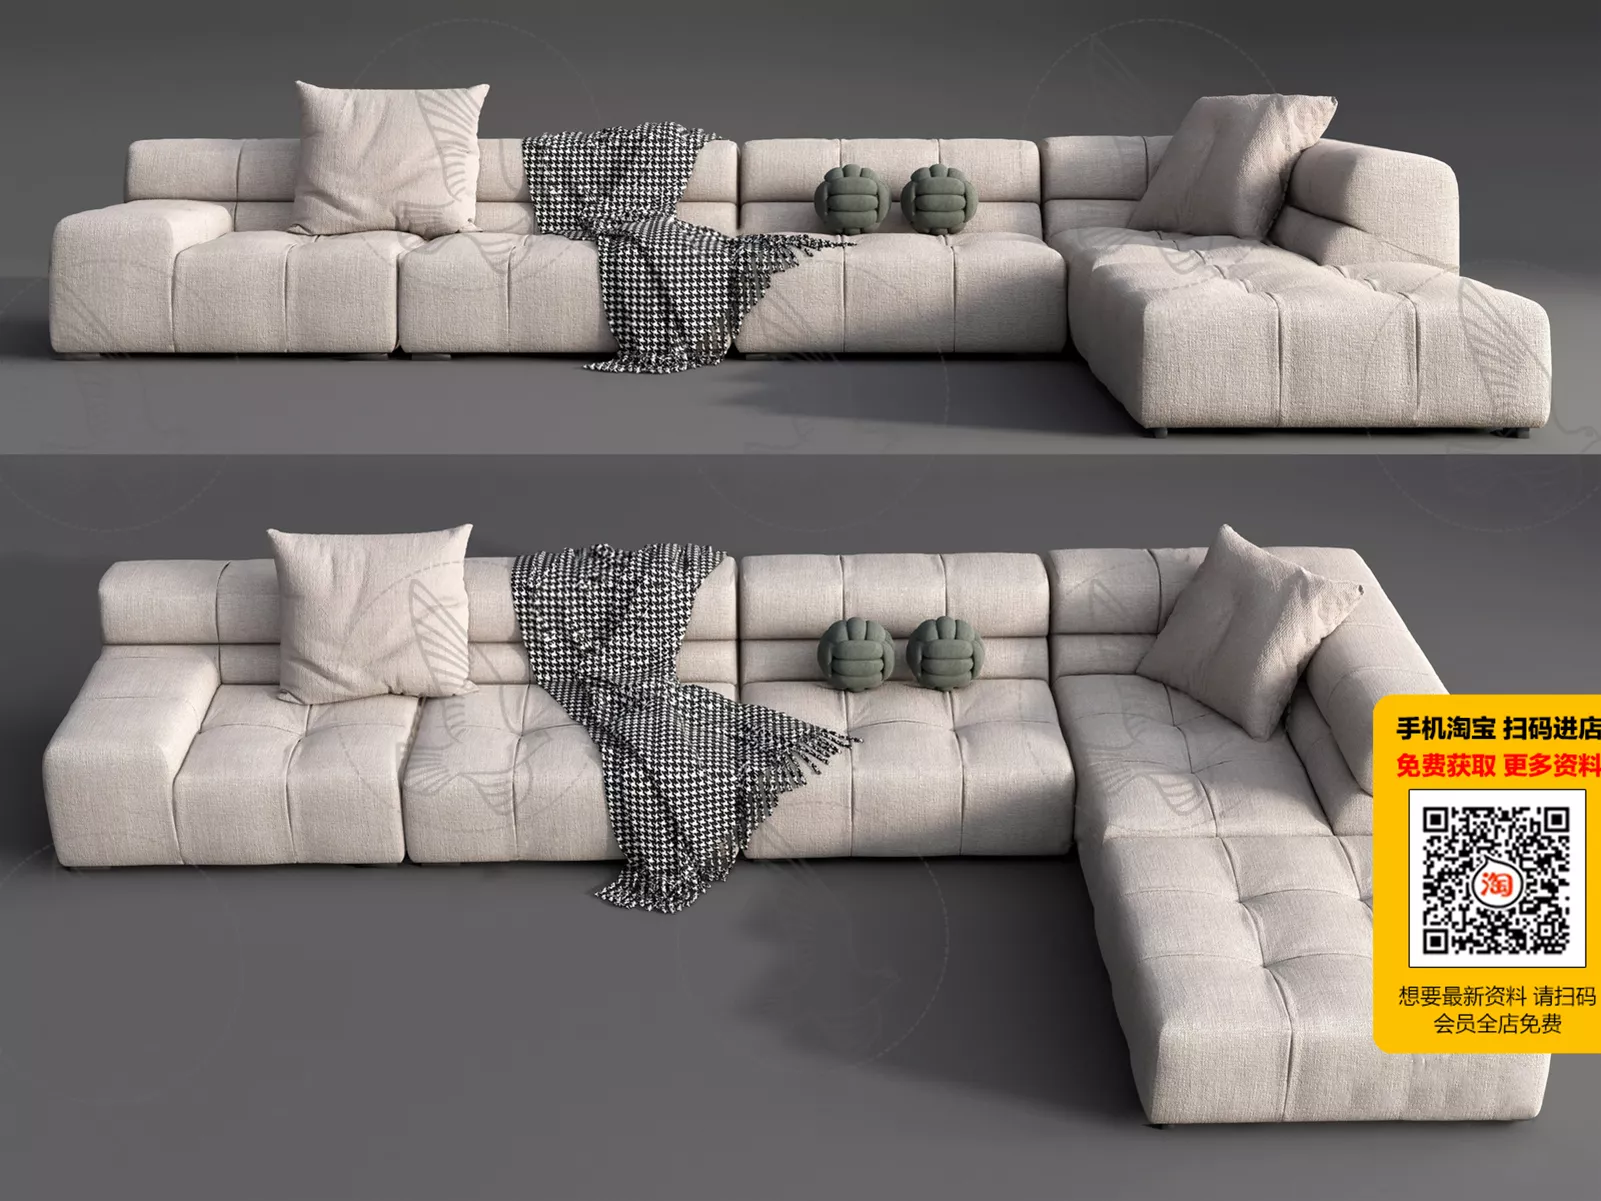 MODERN SOFA - SKETCHUP 3D MODEL - VRAY OR ENSCAPE - ID13047